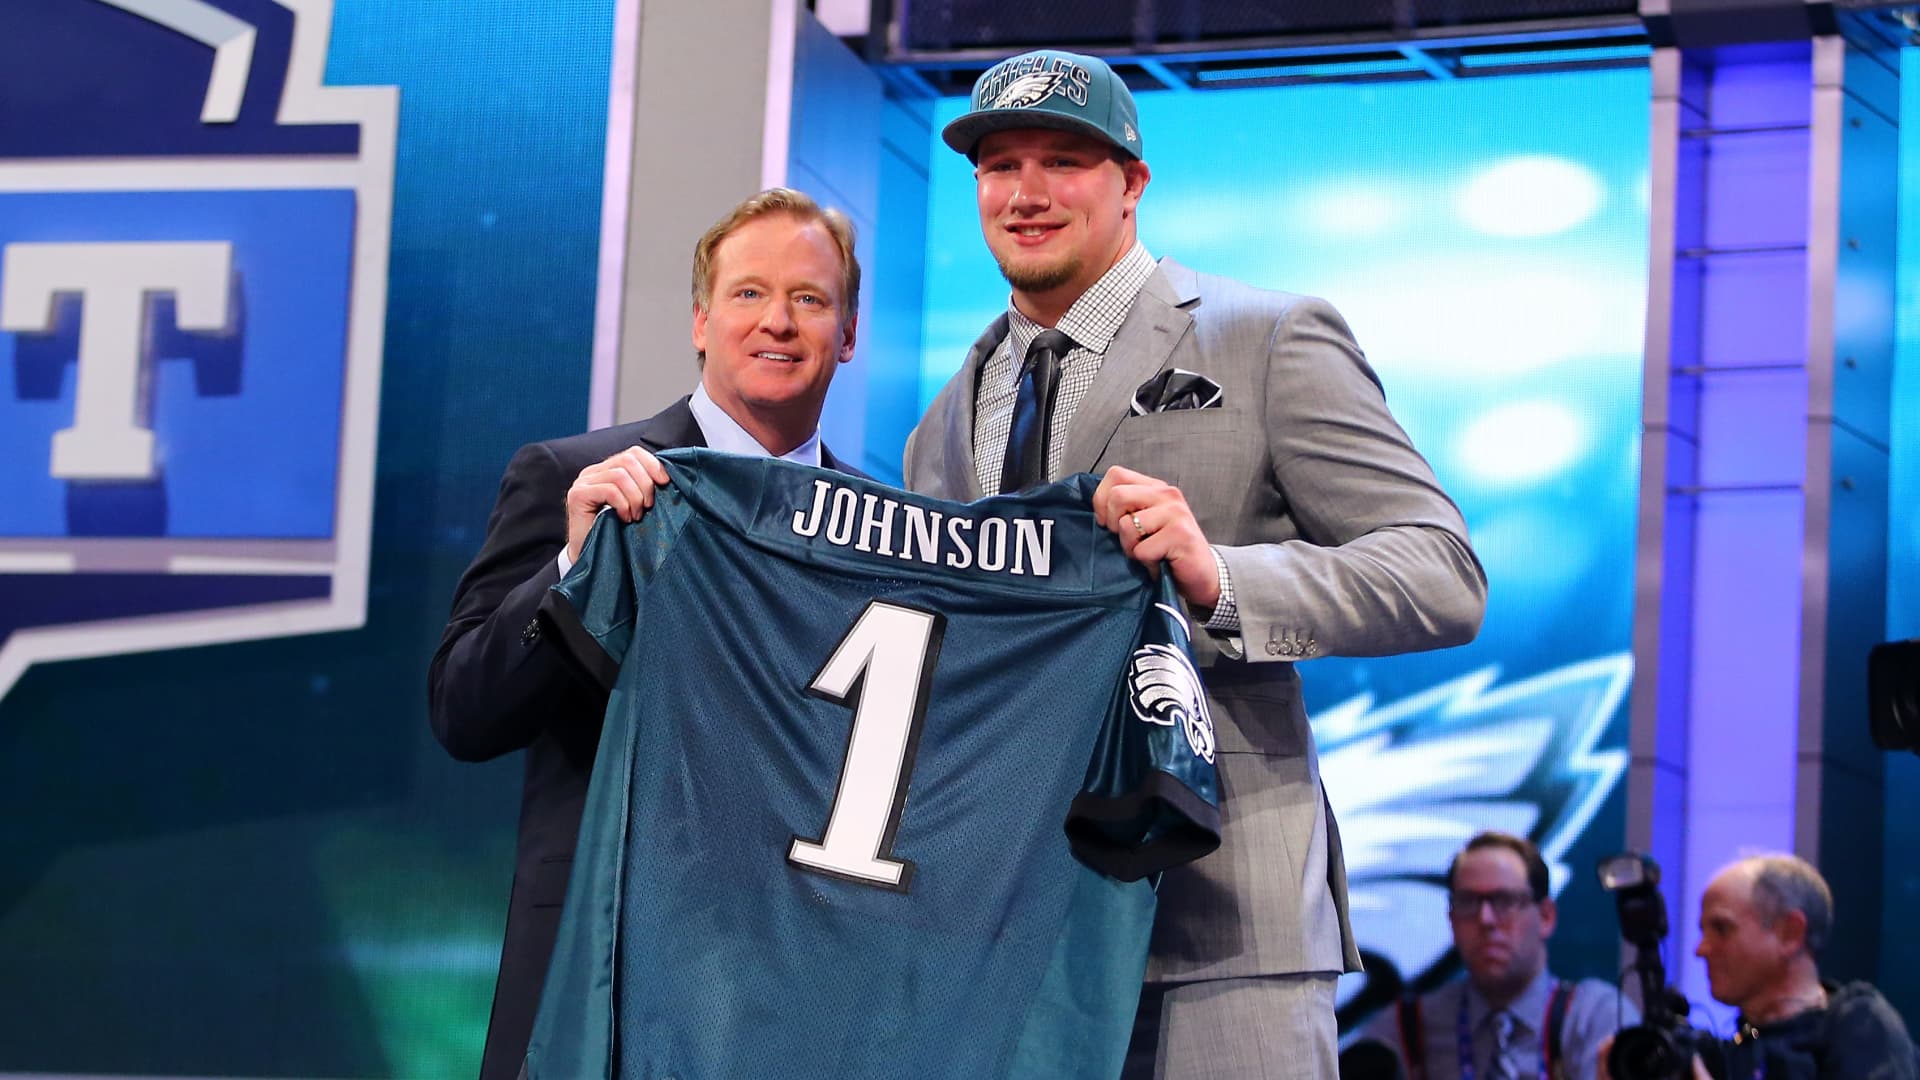 Lane Johnson stands with NFL Commissioner Roger Goodell (L) as they hold up a jersey on stage after Johnson was picked #4 overall by the Philadelphia Eagles in the first round of the 2013 NFL Draft at Radio City Music Hall on April 25, 2013 in New York City.